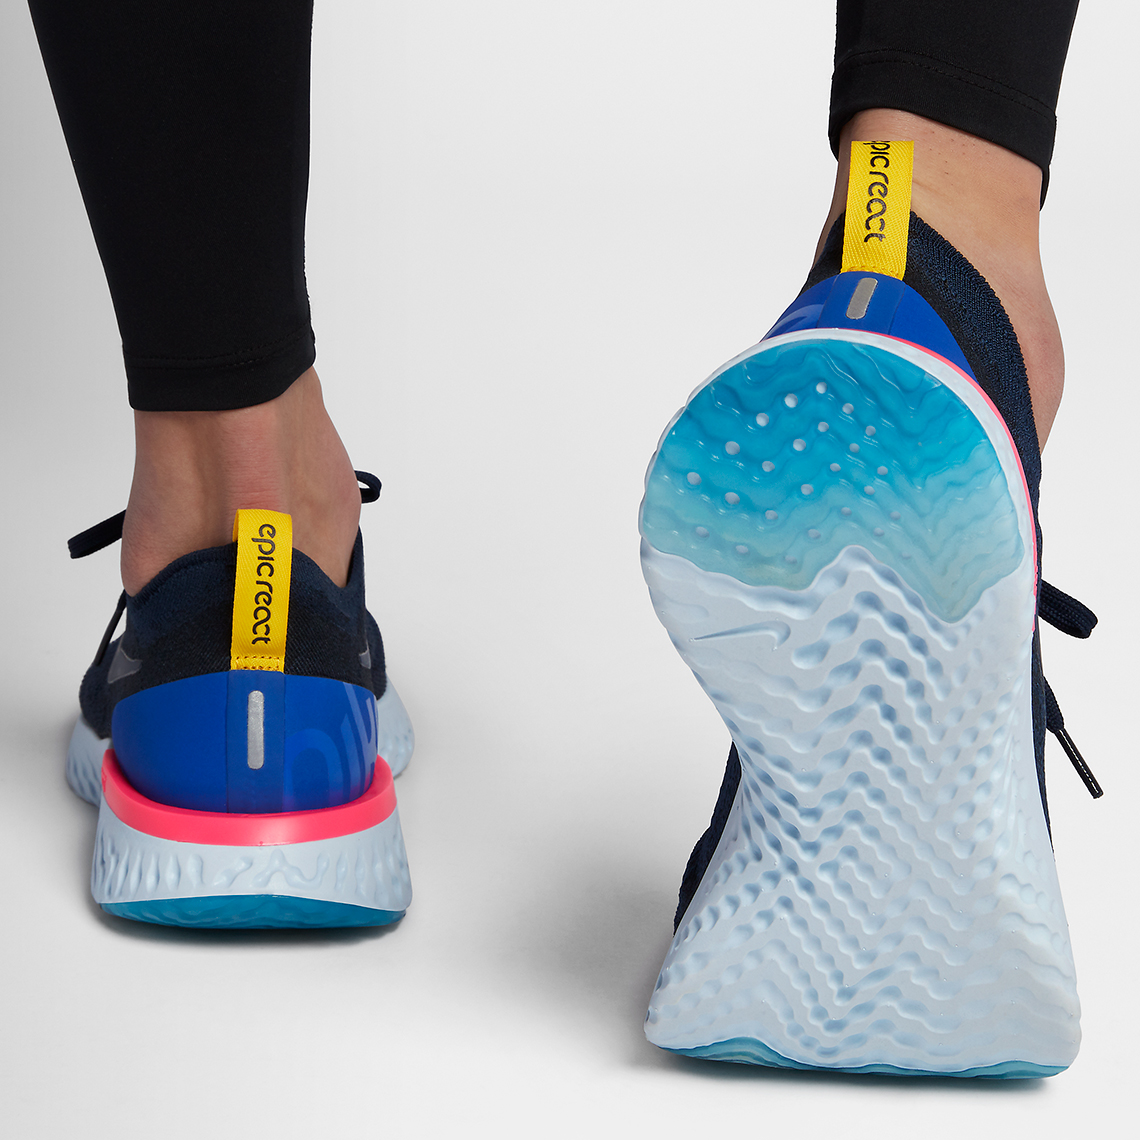 Nike Epic React Running Shoe Release Info + Official Images ...